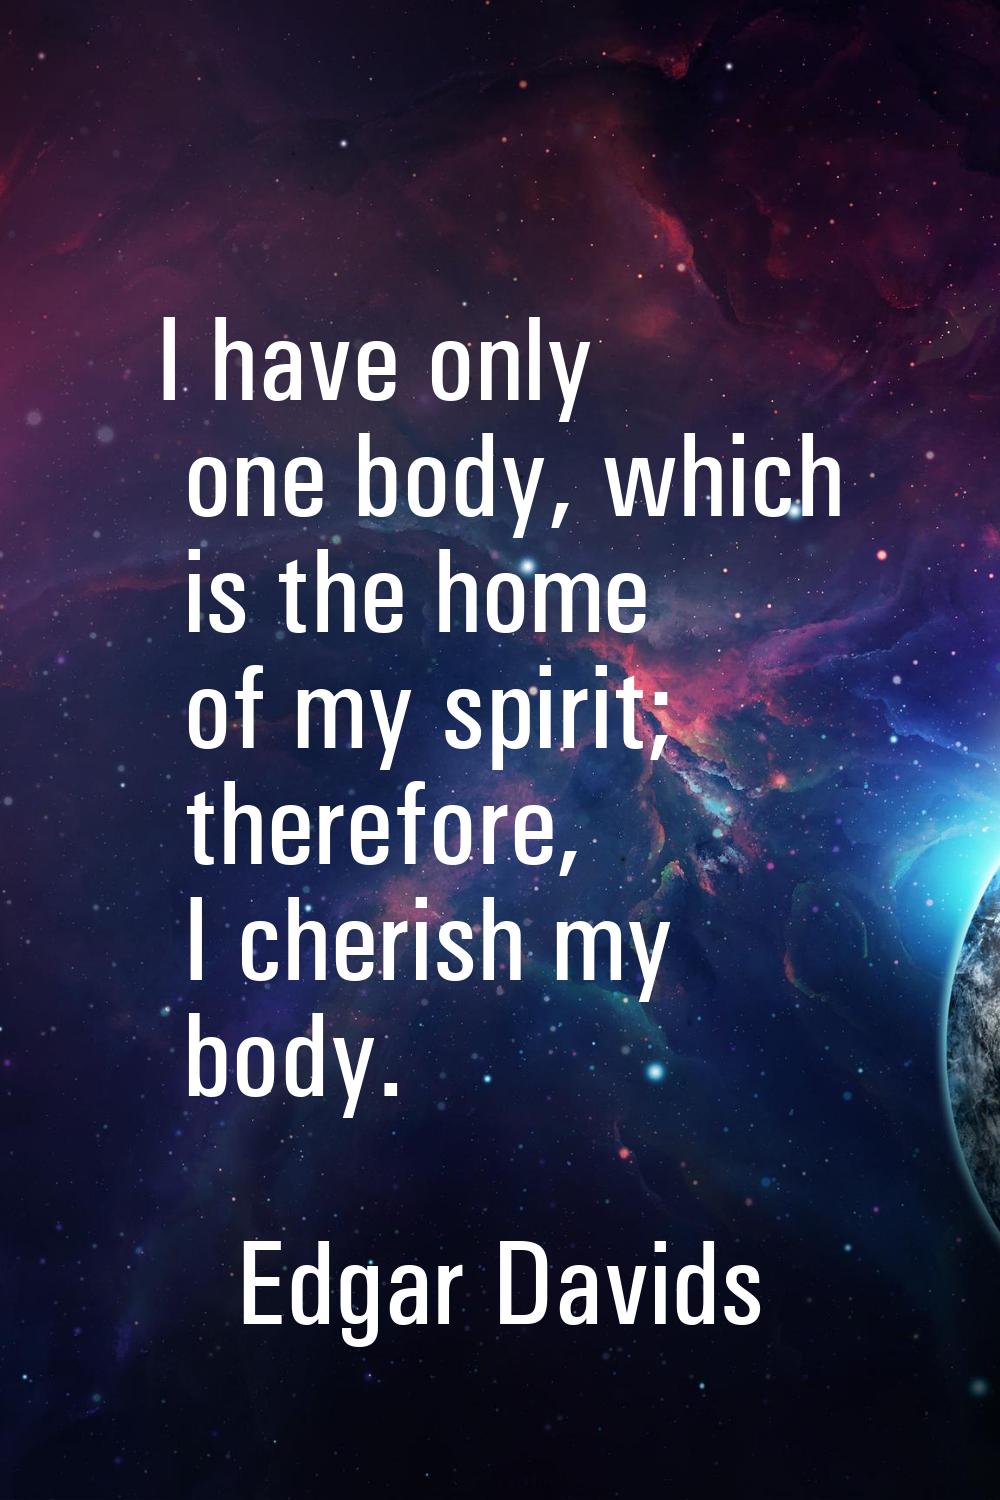 I have only one body, which is the home of my spirit; therefore, I cherish my body.